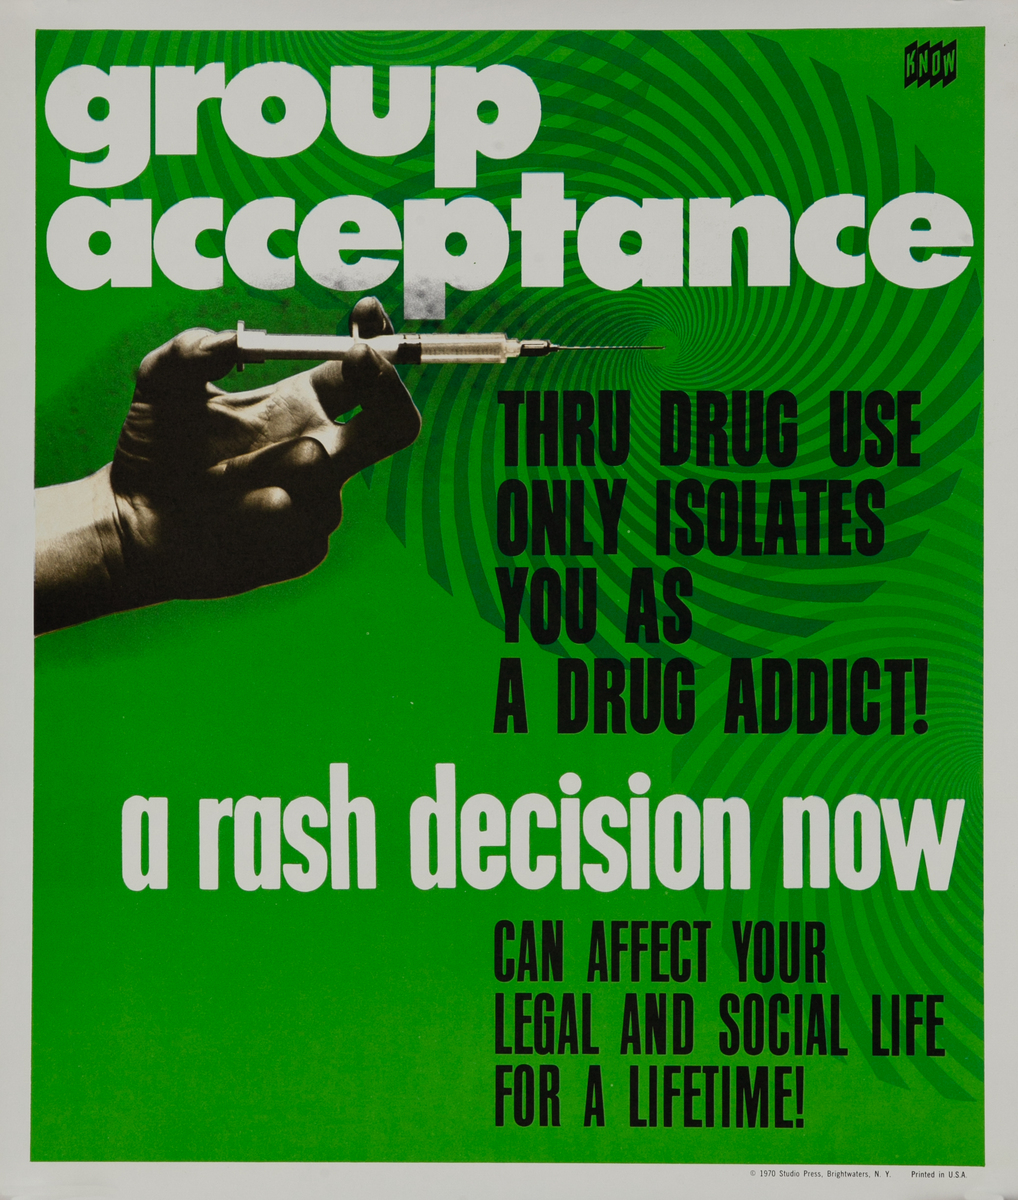 KNOW Group Acceptance thru drug use only isolates you as a drug addict!